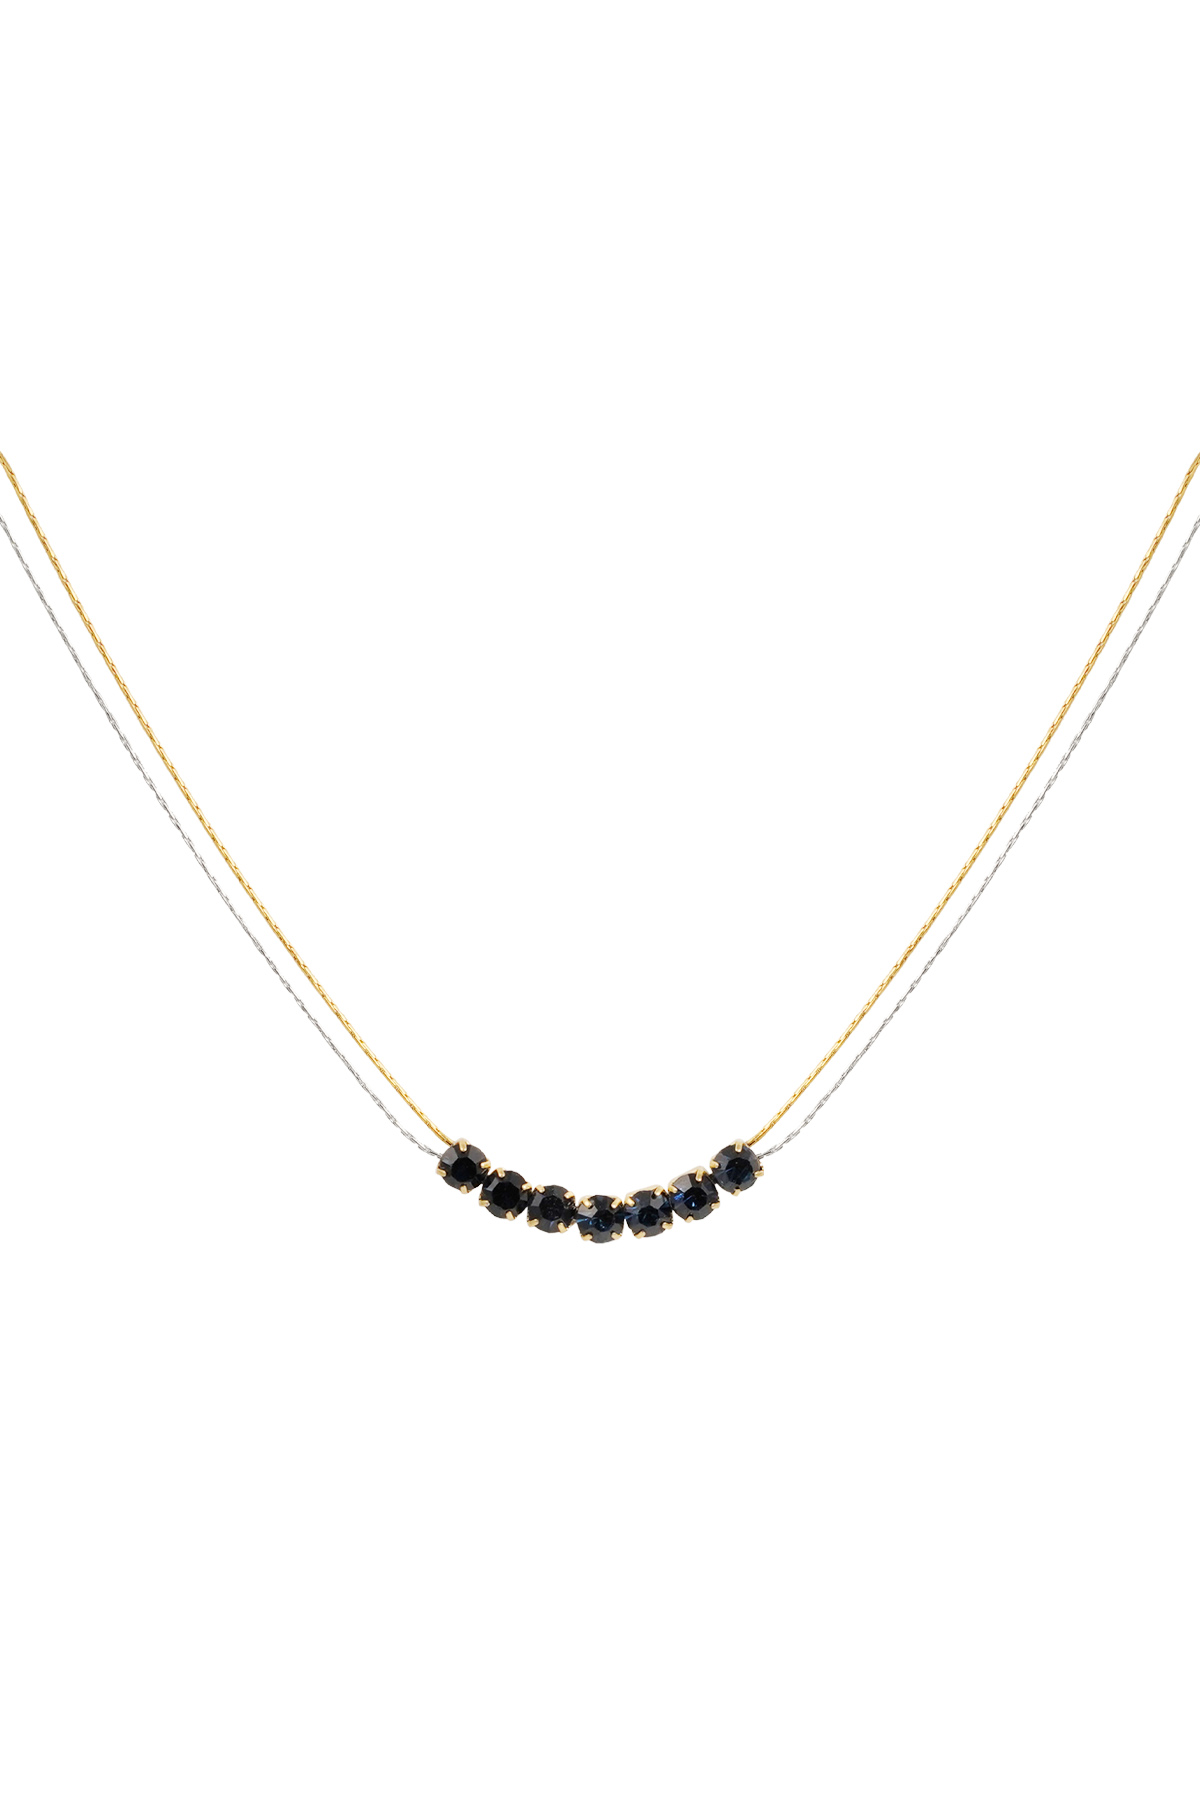 Necklace gold/silver with stone - black h5 